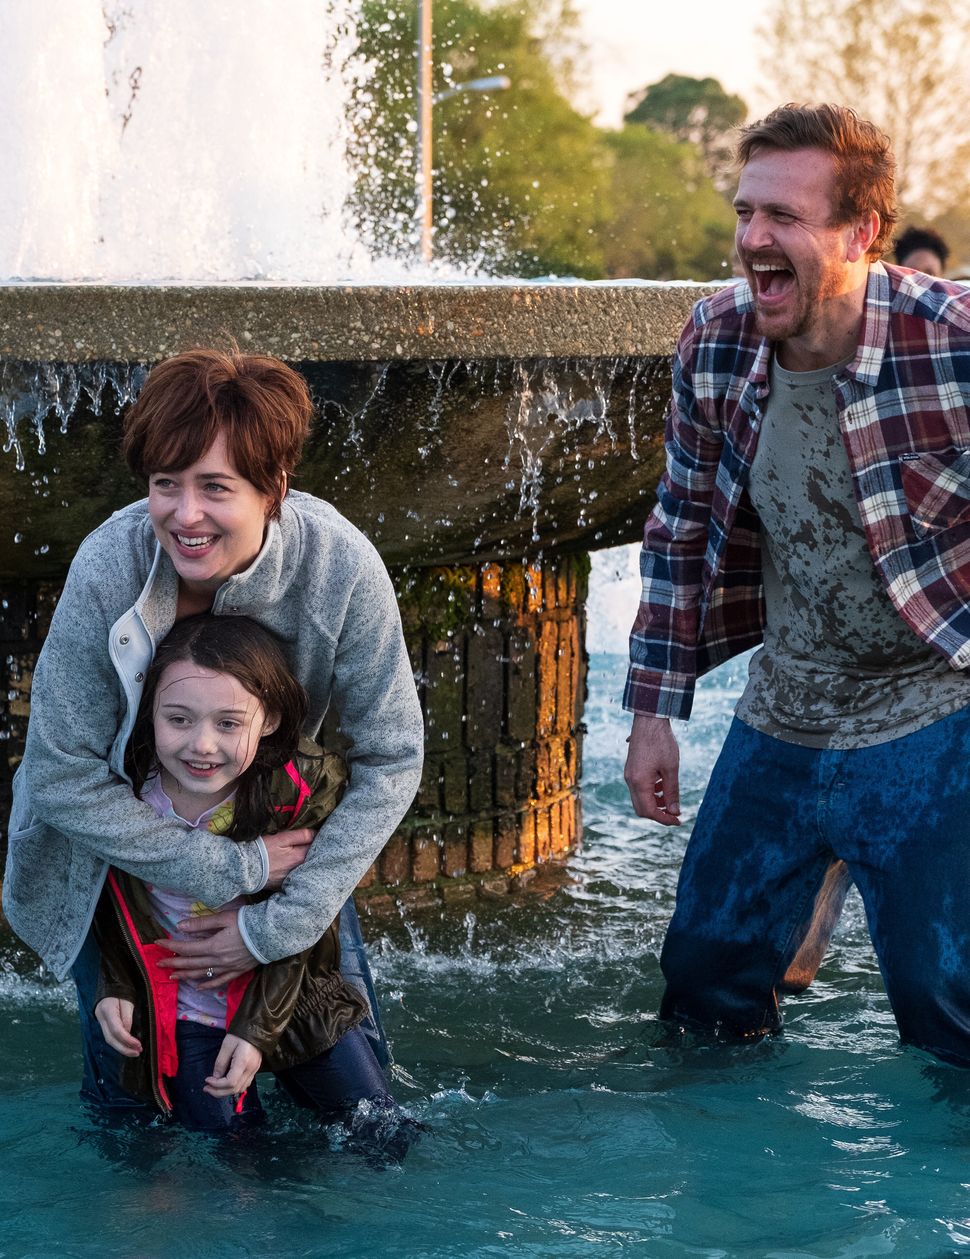 Dakota Johnson, Violet McGraw and Jason Segel in "Our Friend," in theaters and on demand Jan. 22. 